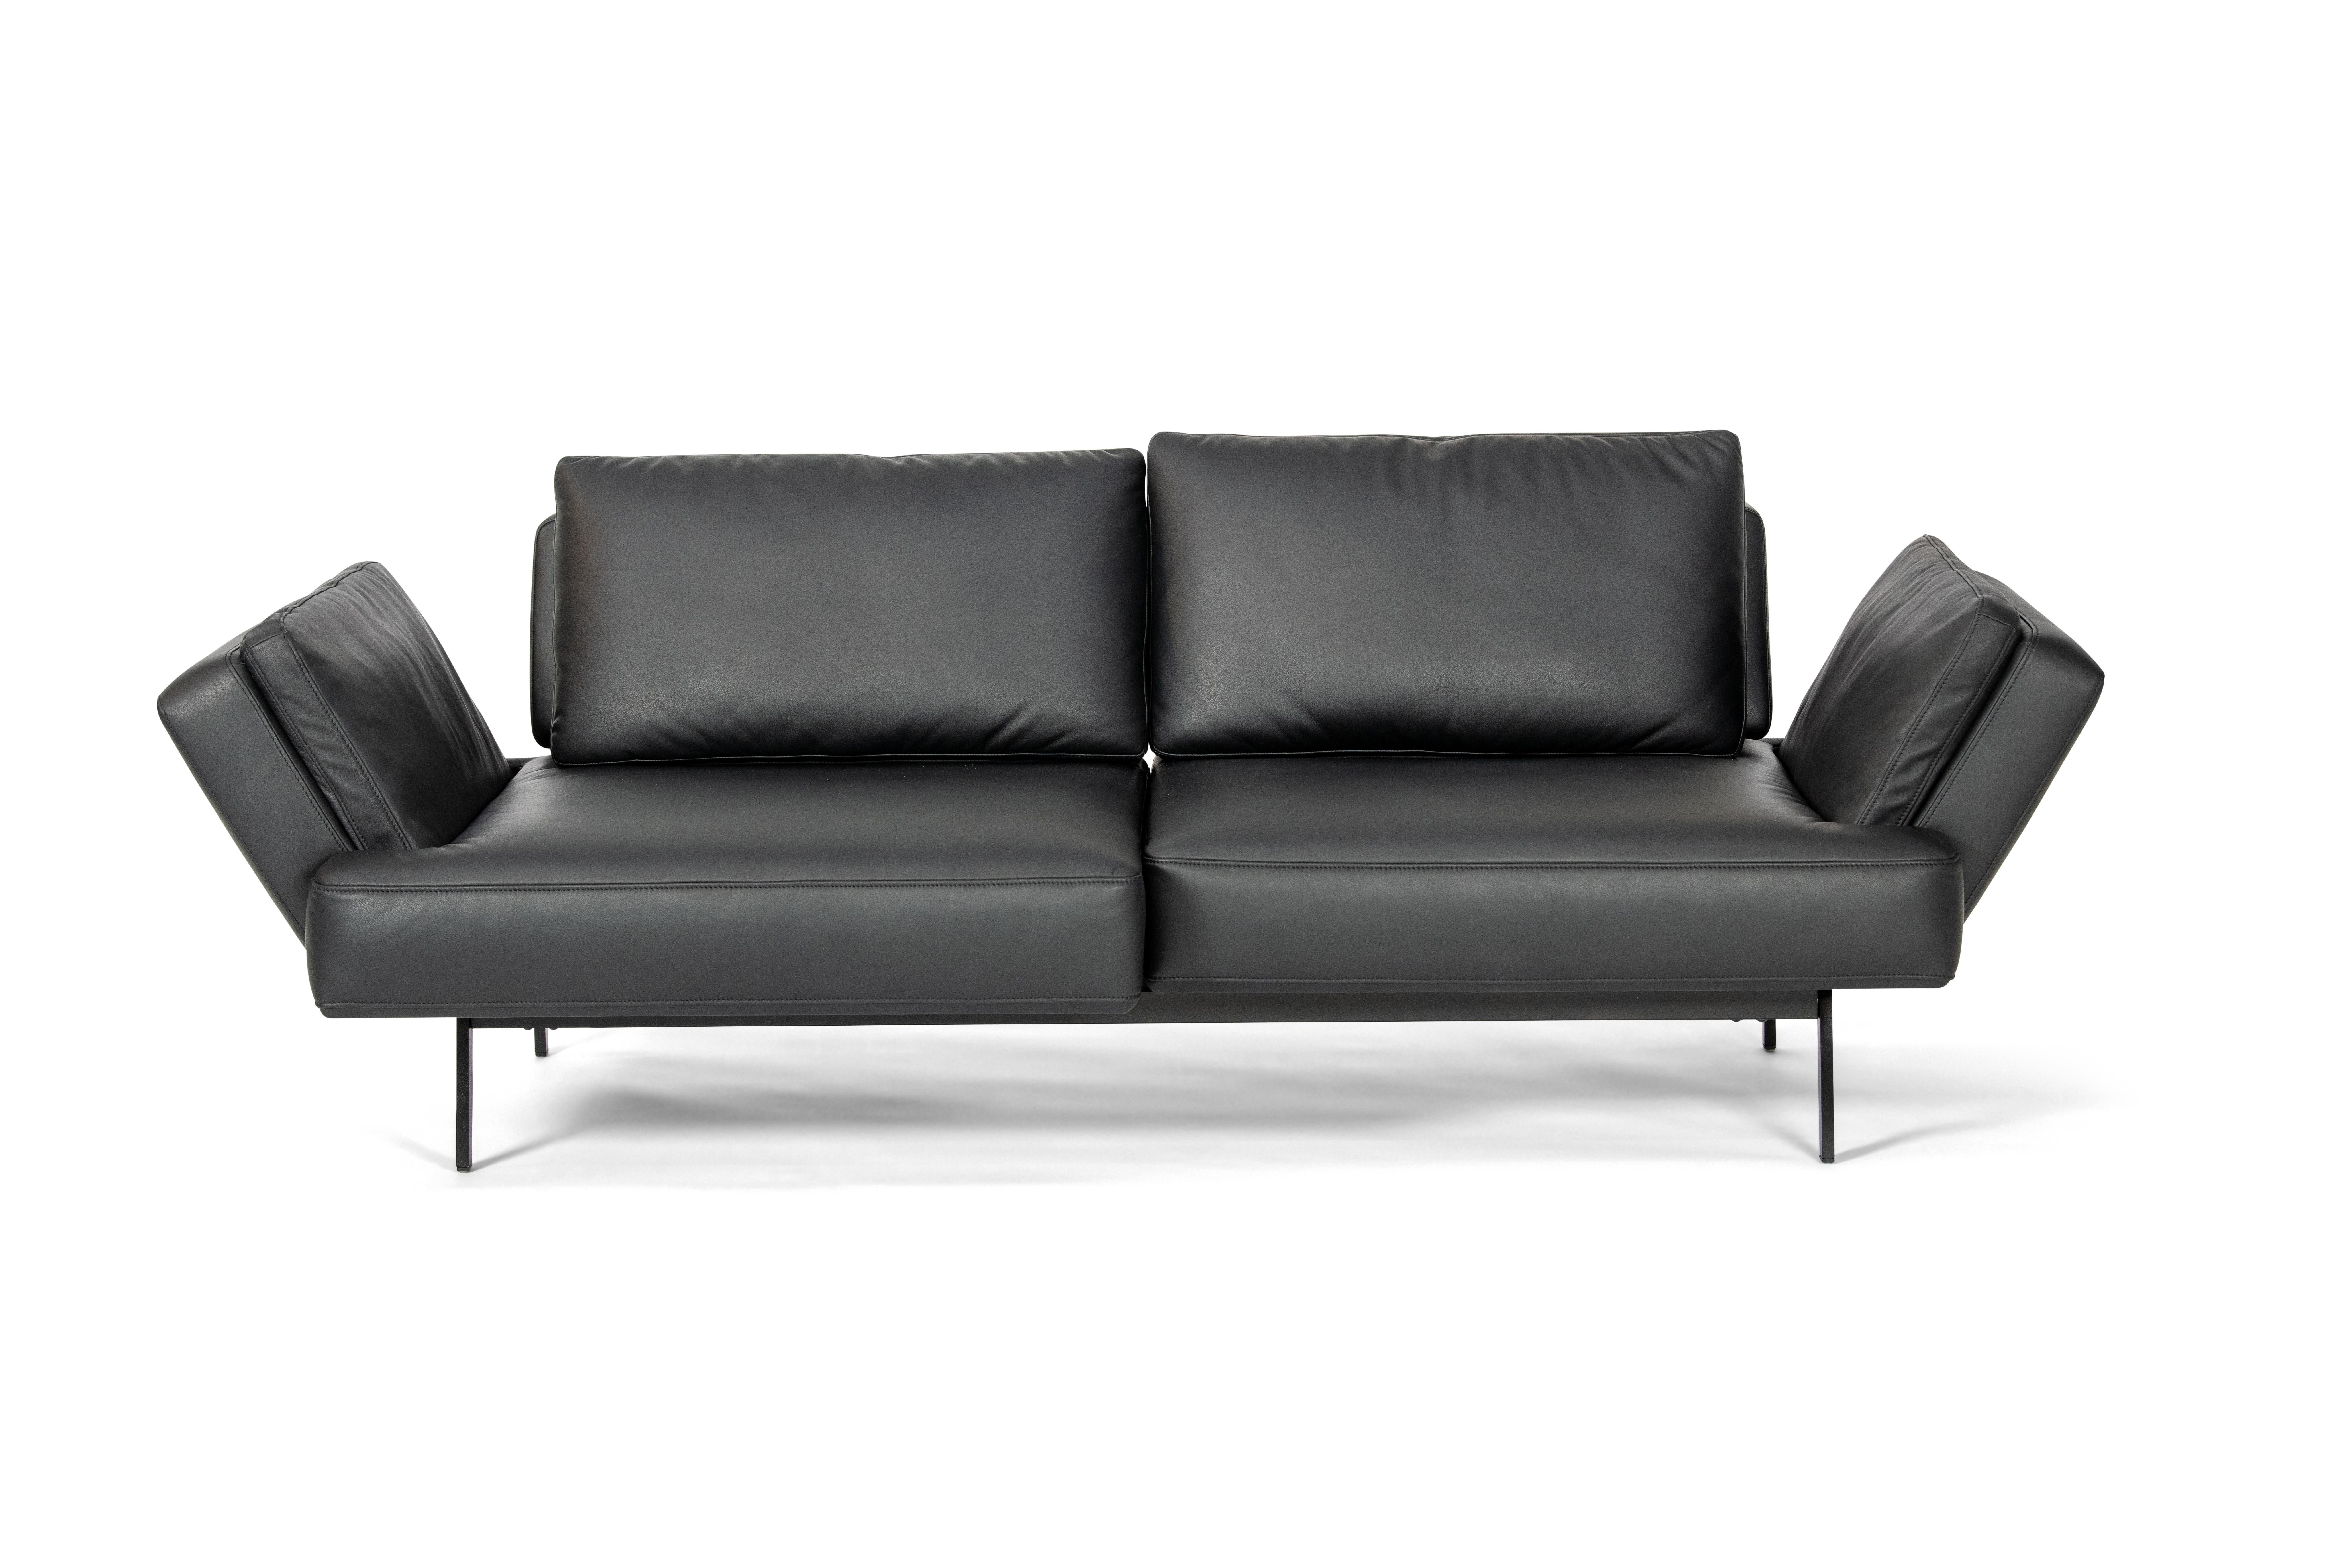 Modern DeSede DS-747/02 Multifunctional Sofa in Black Leather Seat and Back Upholstery For Sale